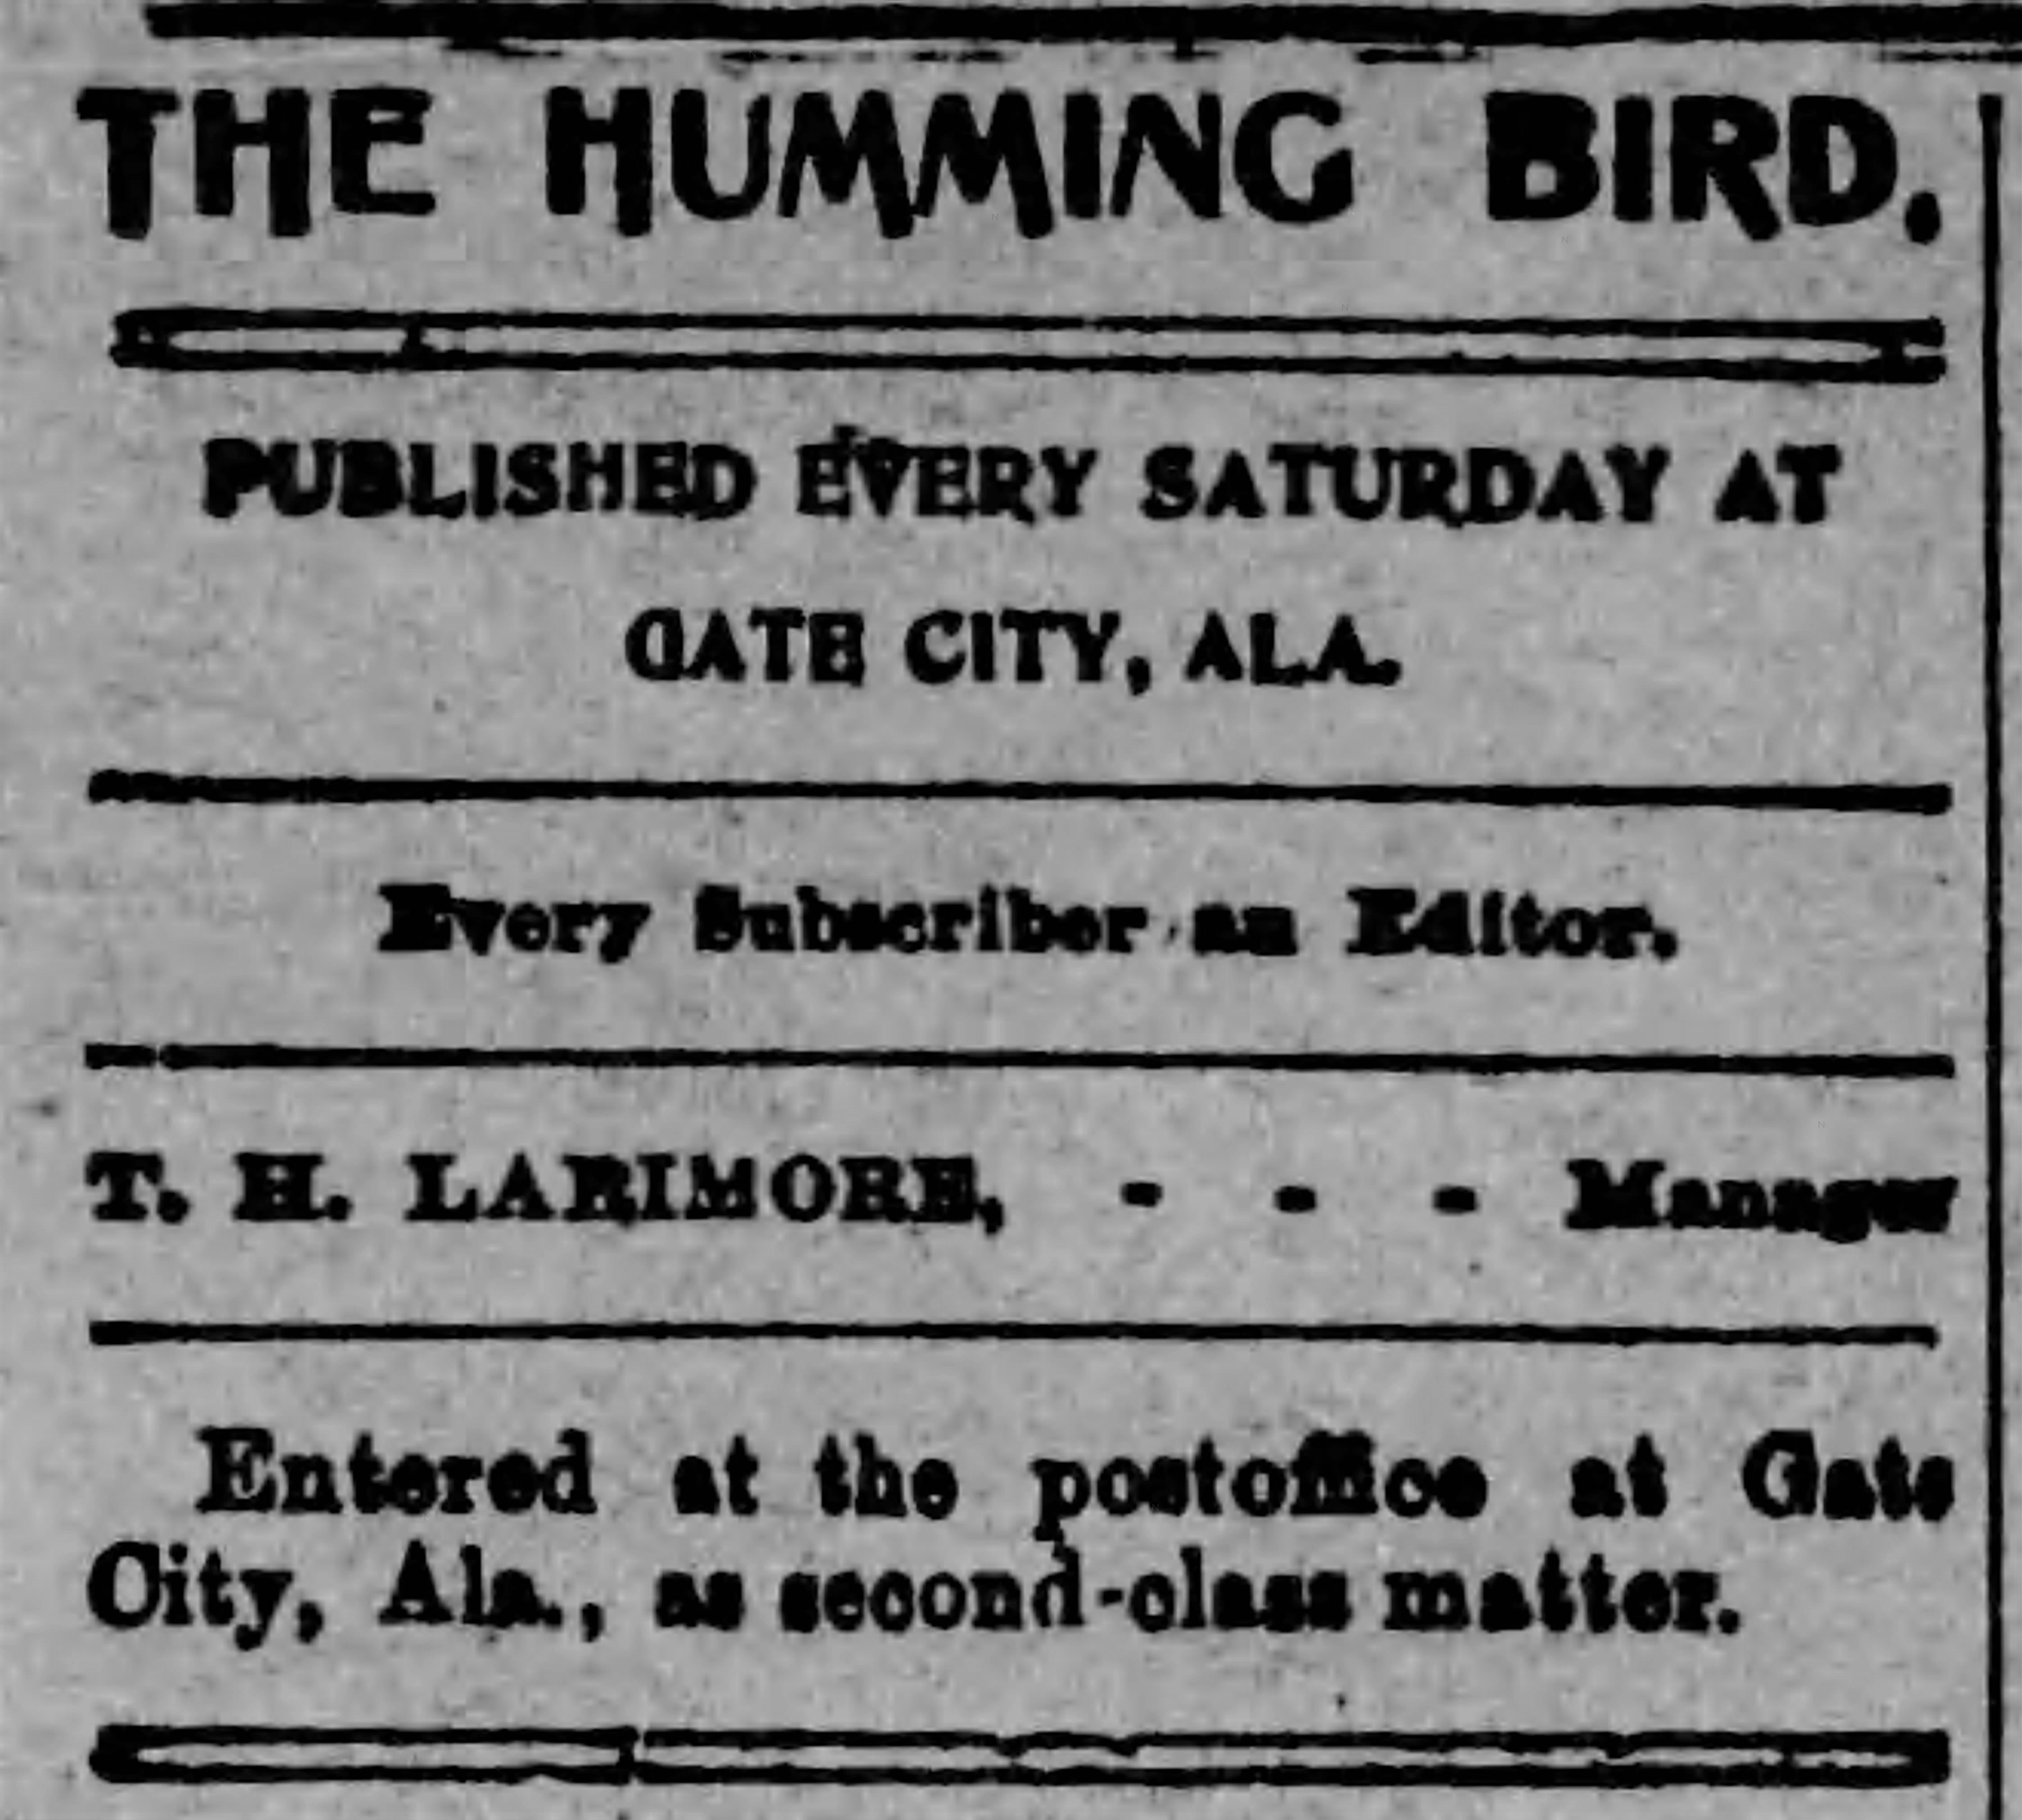 PATRON - Gate City, Alabama – December 1, 1900 – Water Co. working to get water to Woodlawn, Read and Martin wed.